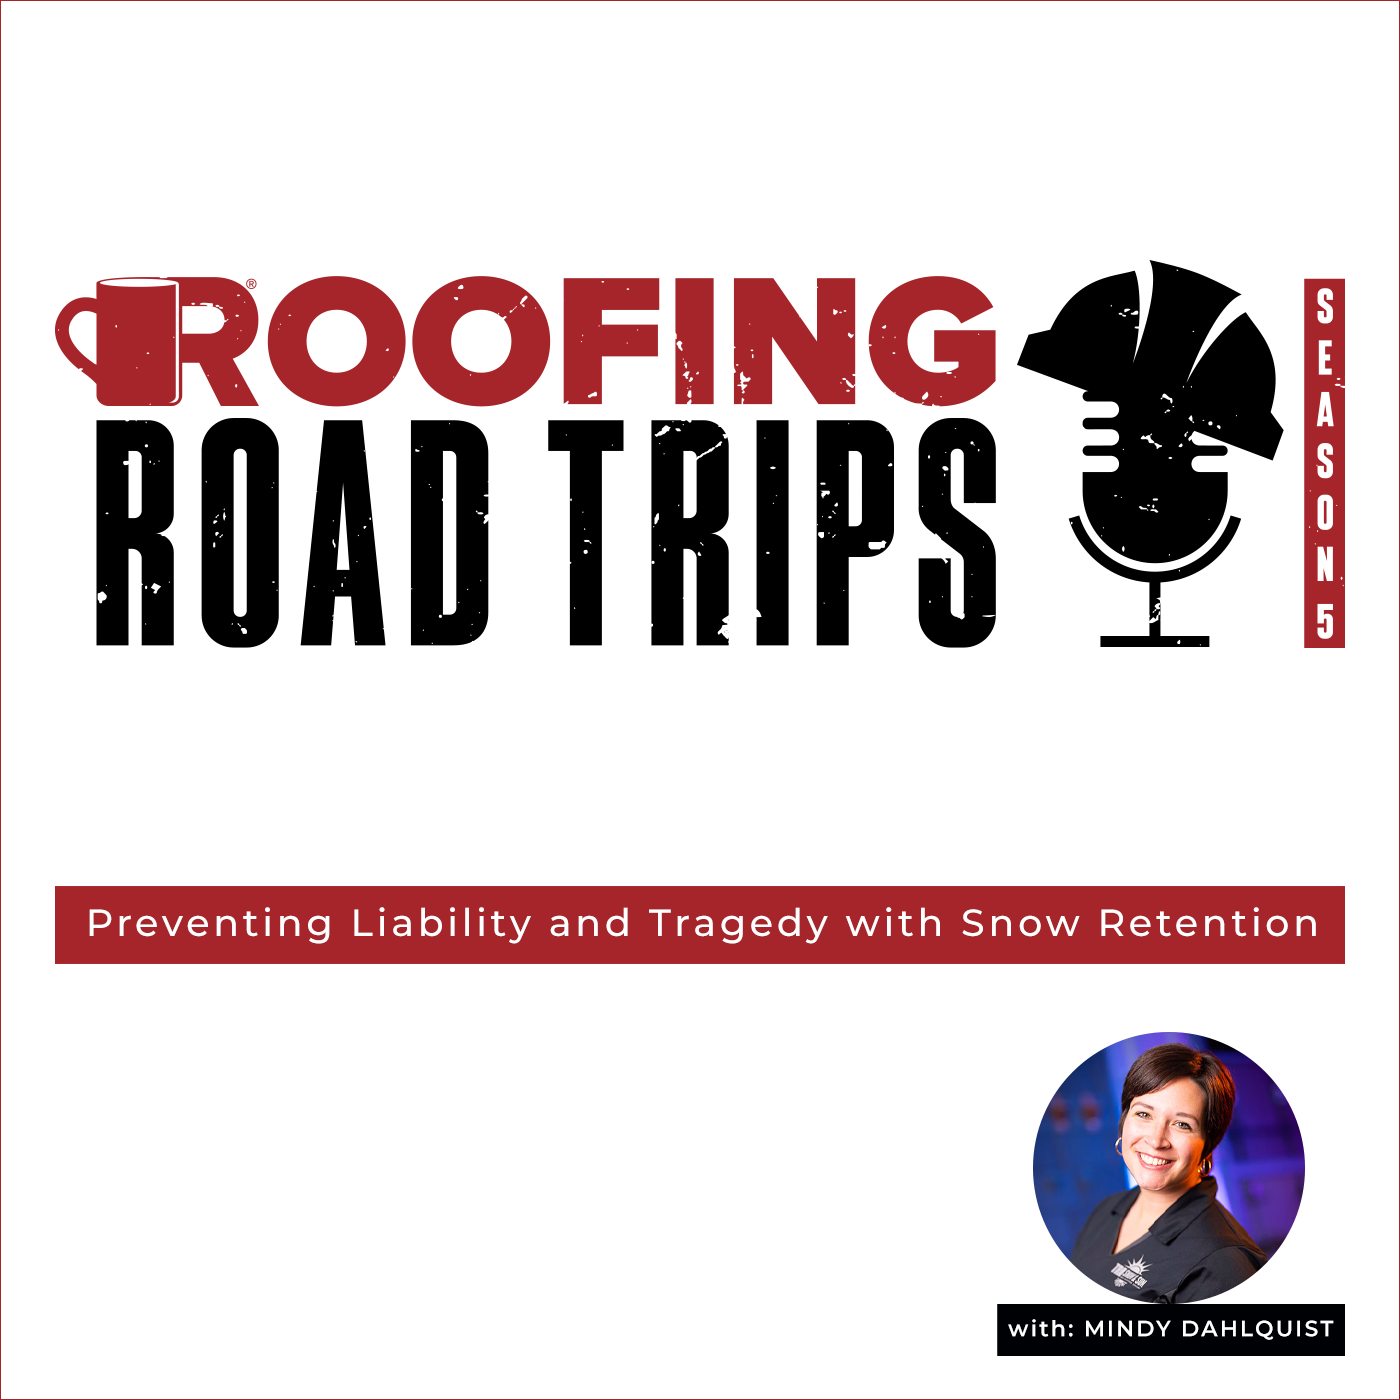 The Roofing Company's Nick Mentzer Talks Snow Retention with ROOFERS COFFEESHOP Podcast